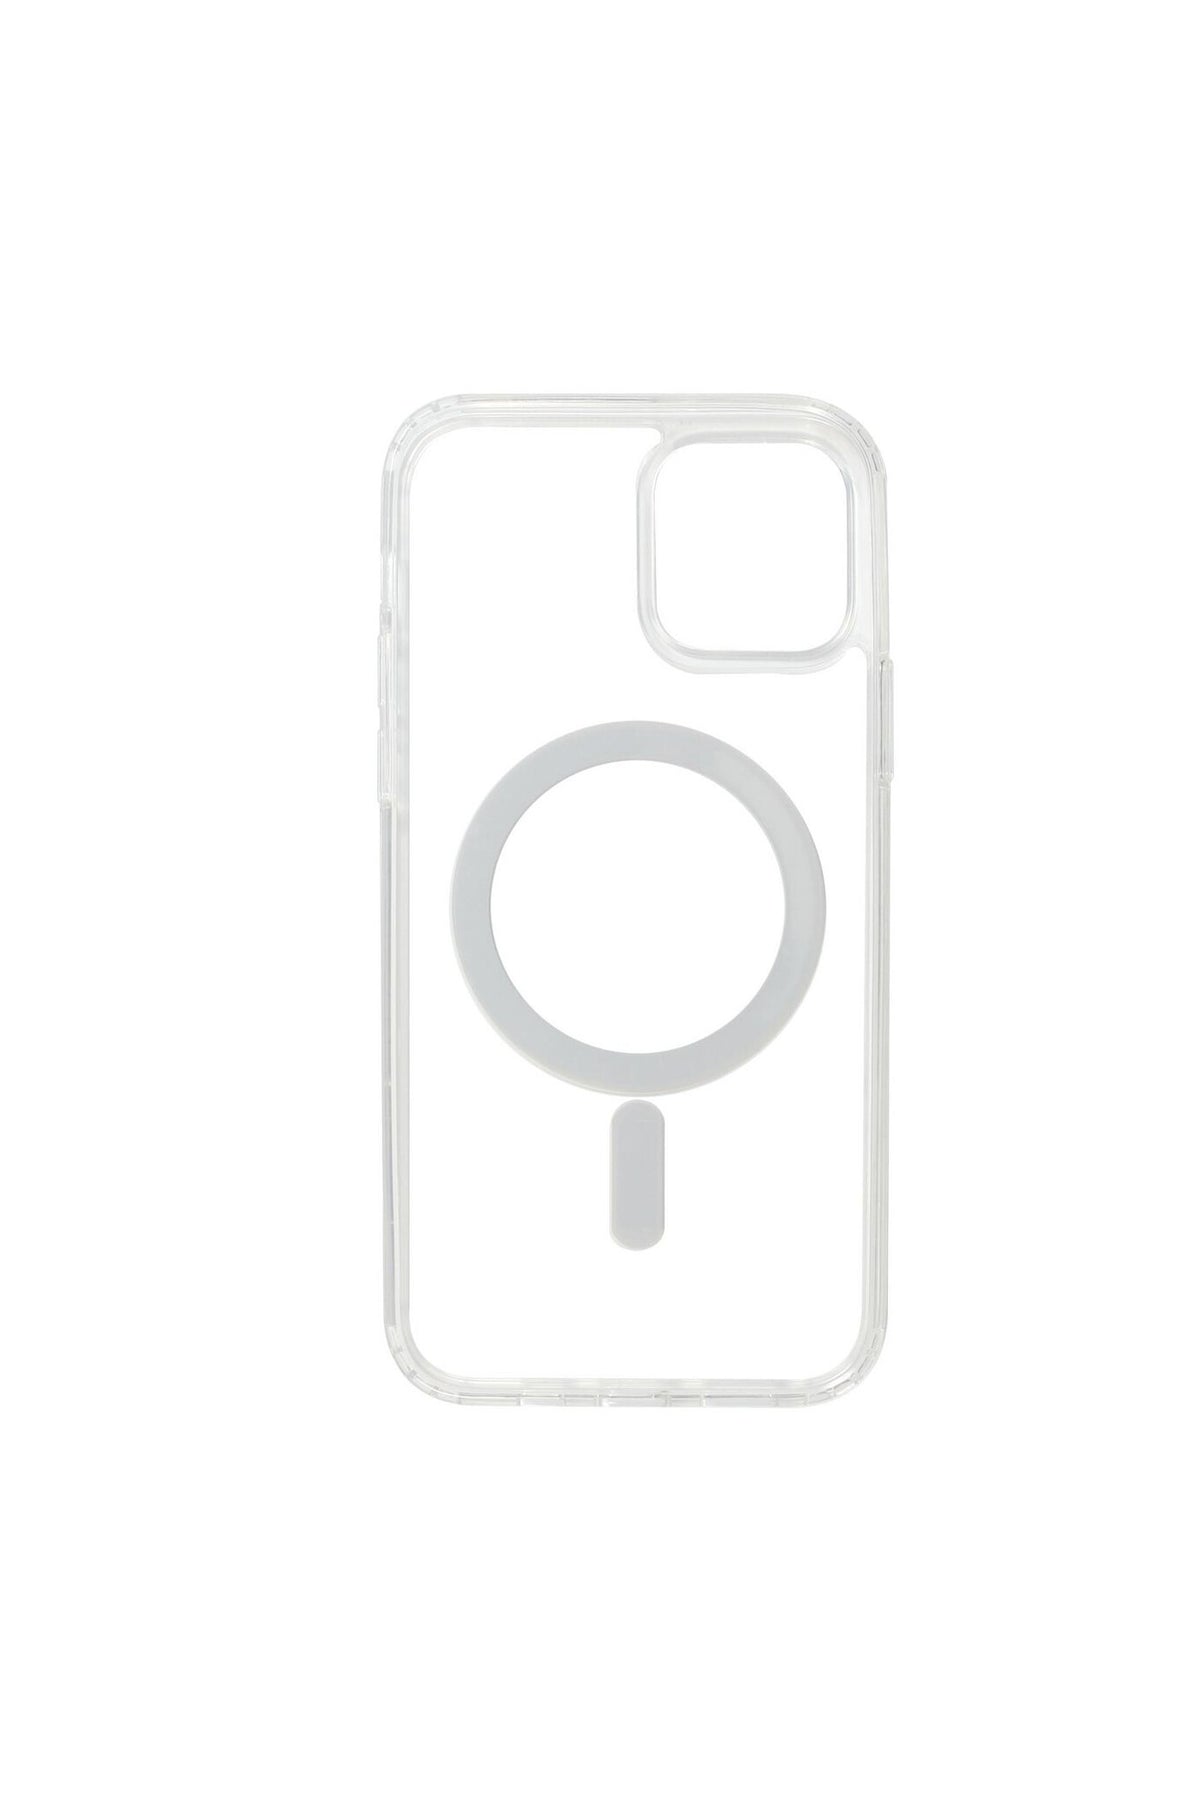 eSTUFF BERLIN Magnetic Hybrid mobile phone case for iPhone 12 / 12 Pro in Clear